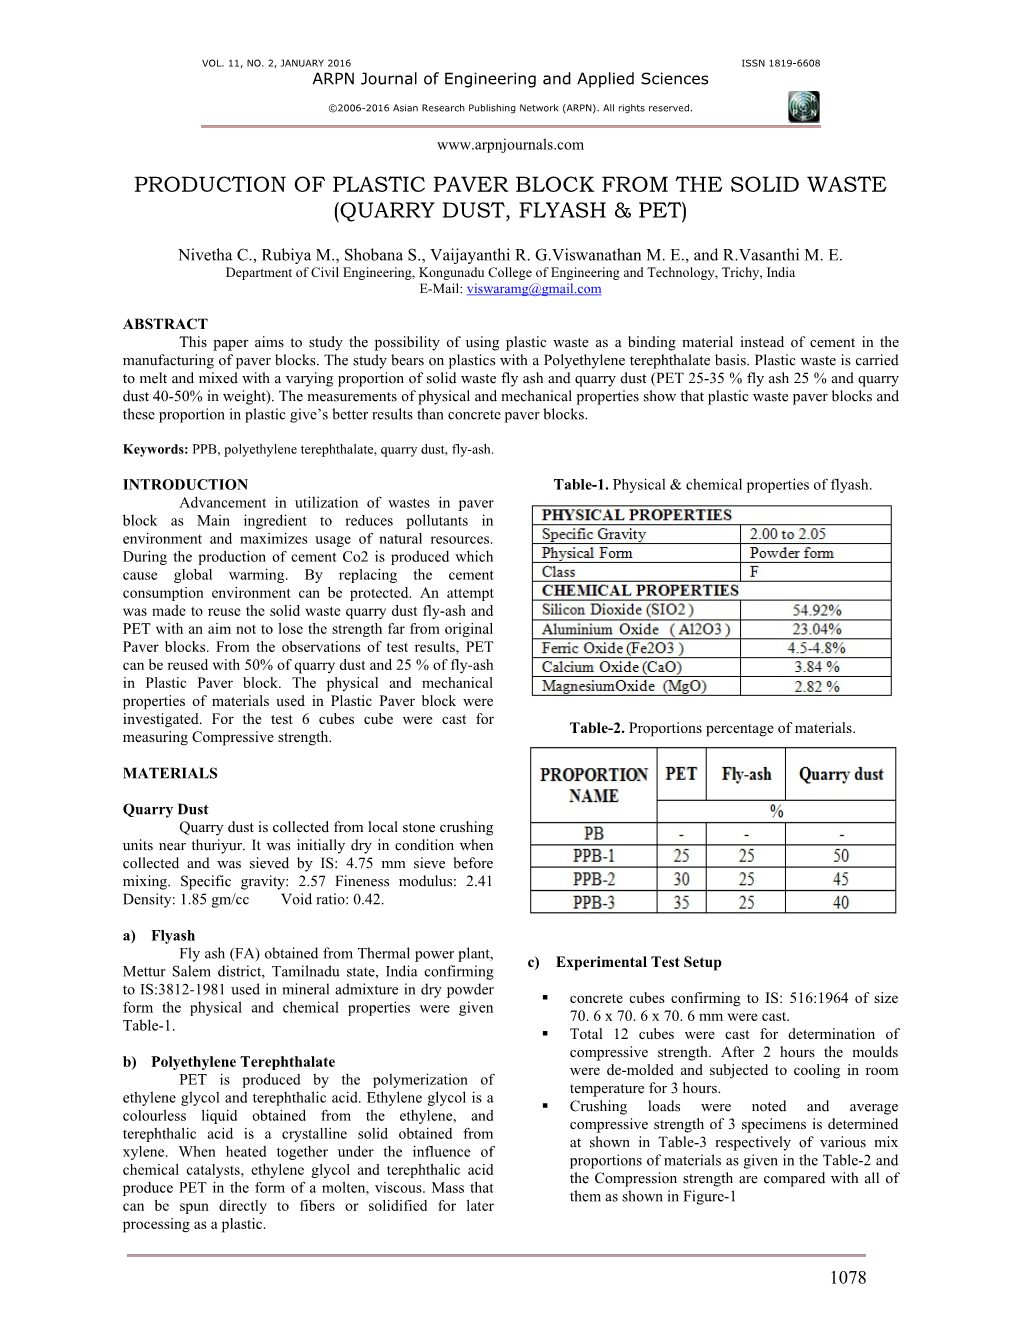 Production of Plastic Paver Block from the Solid Waste (Quarry Dust, Flyash & Pet)